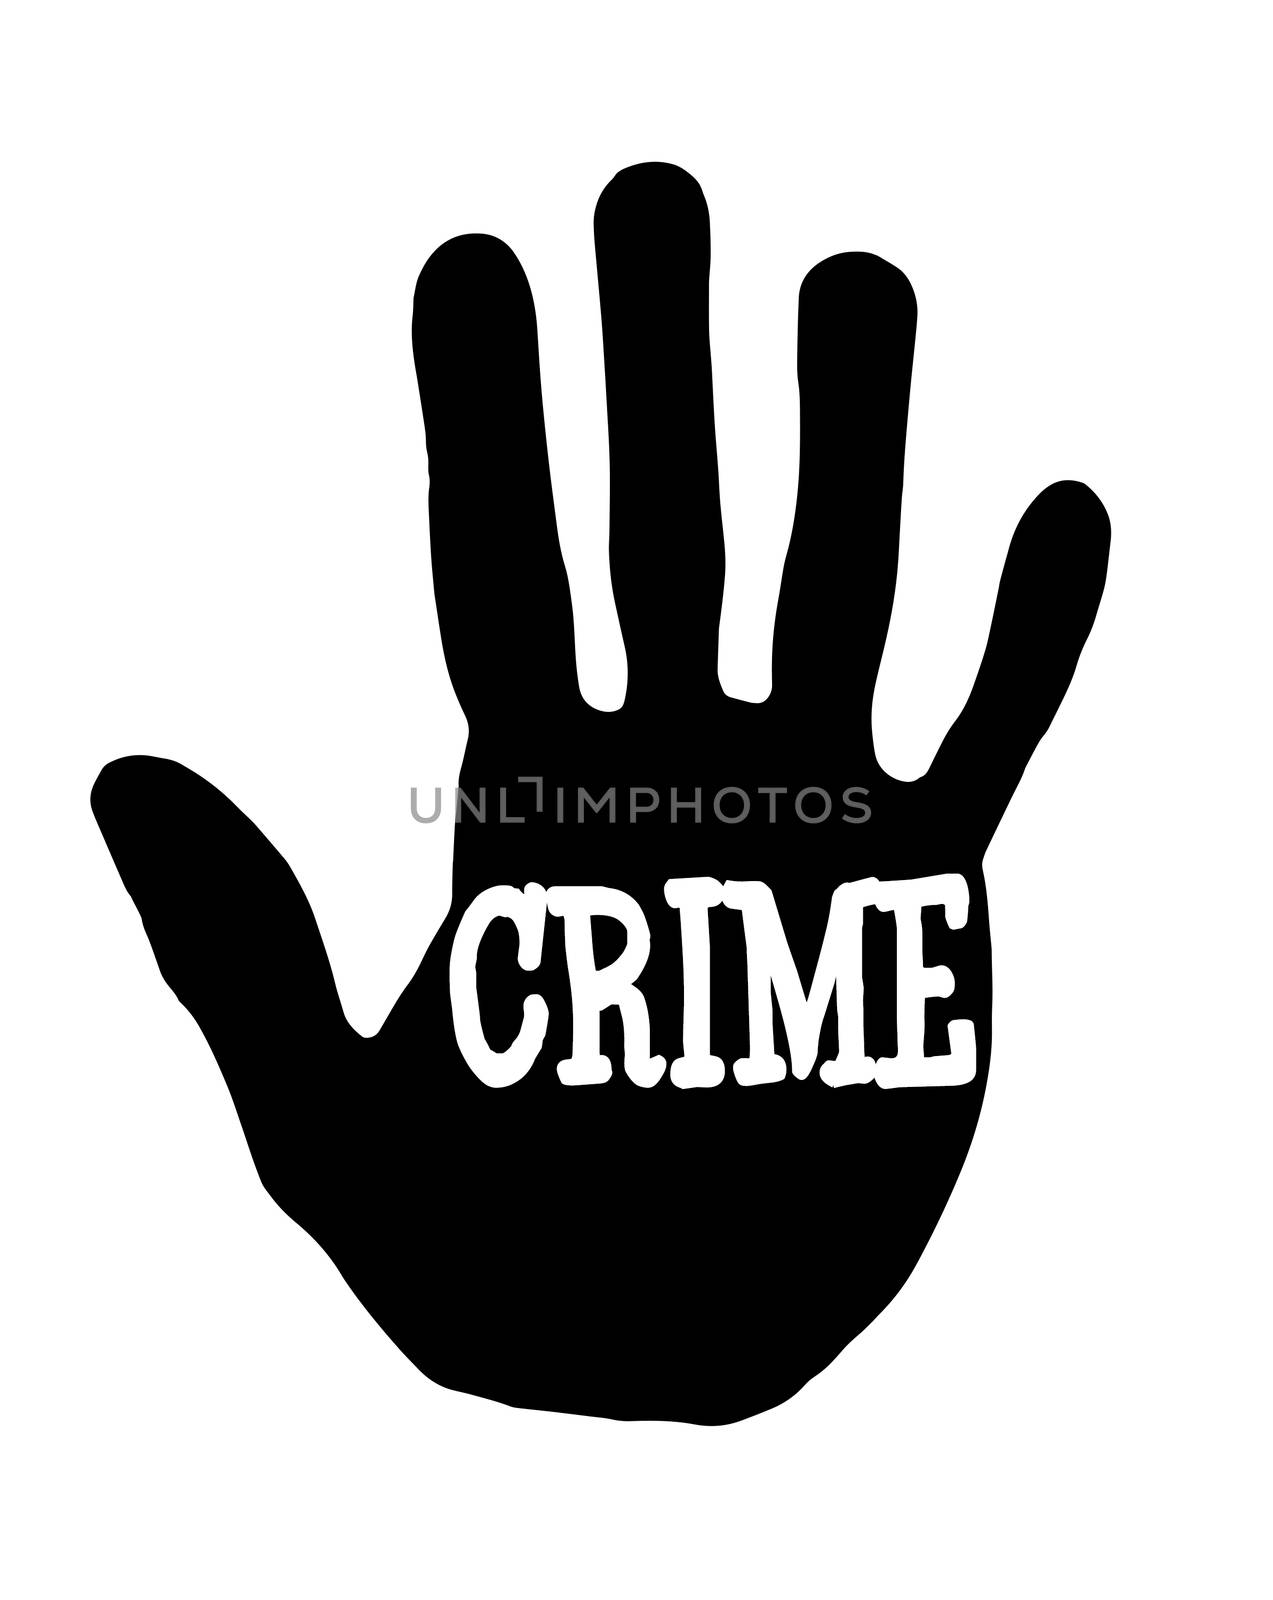 Man handprint isolated on white background showing stop crime